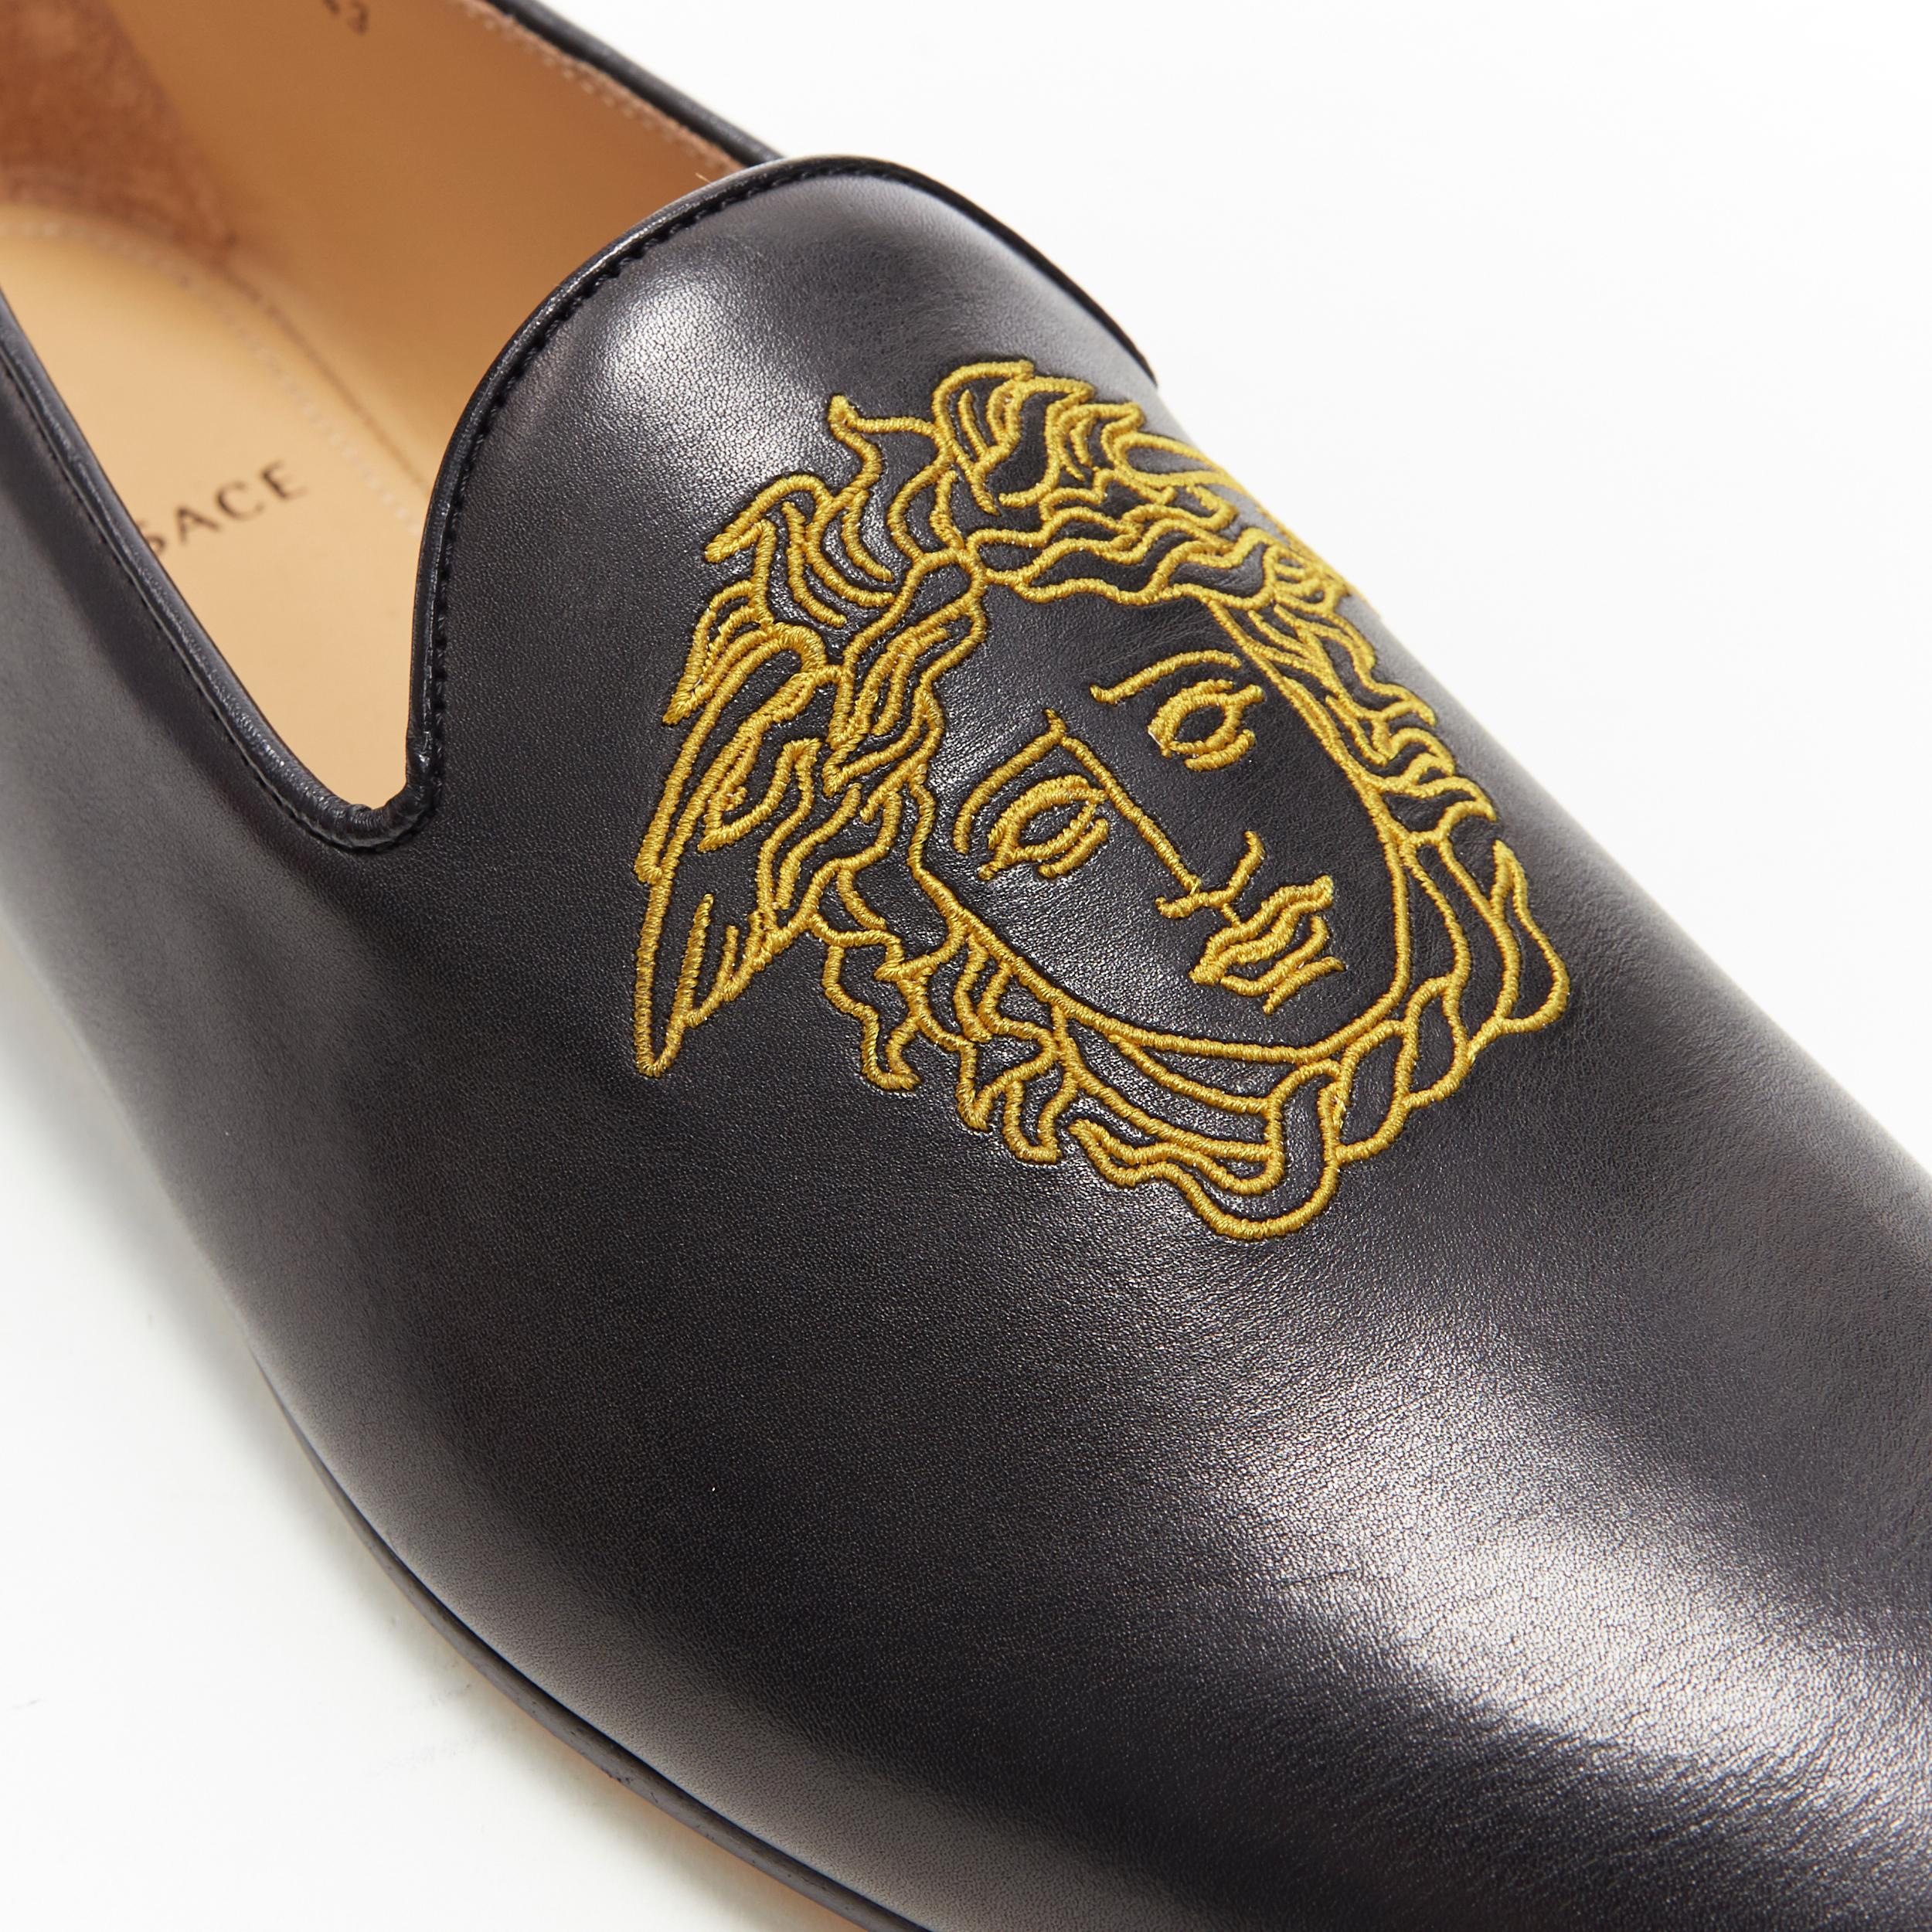 Men's new VERSACE black leather gold Medusa embroidery le smoking slipper loafer EU43